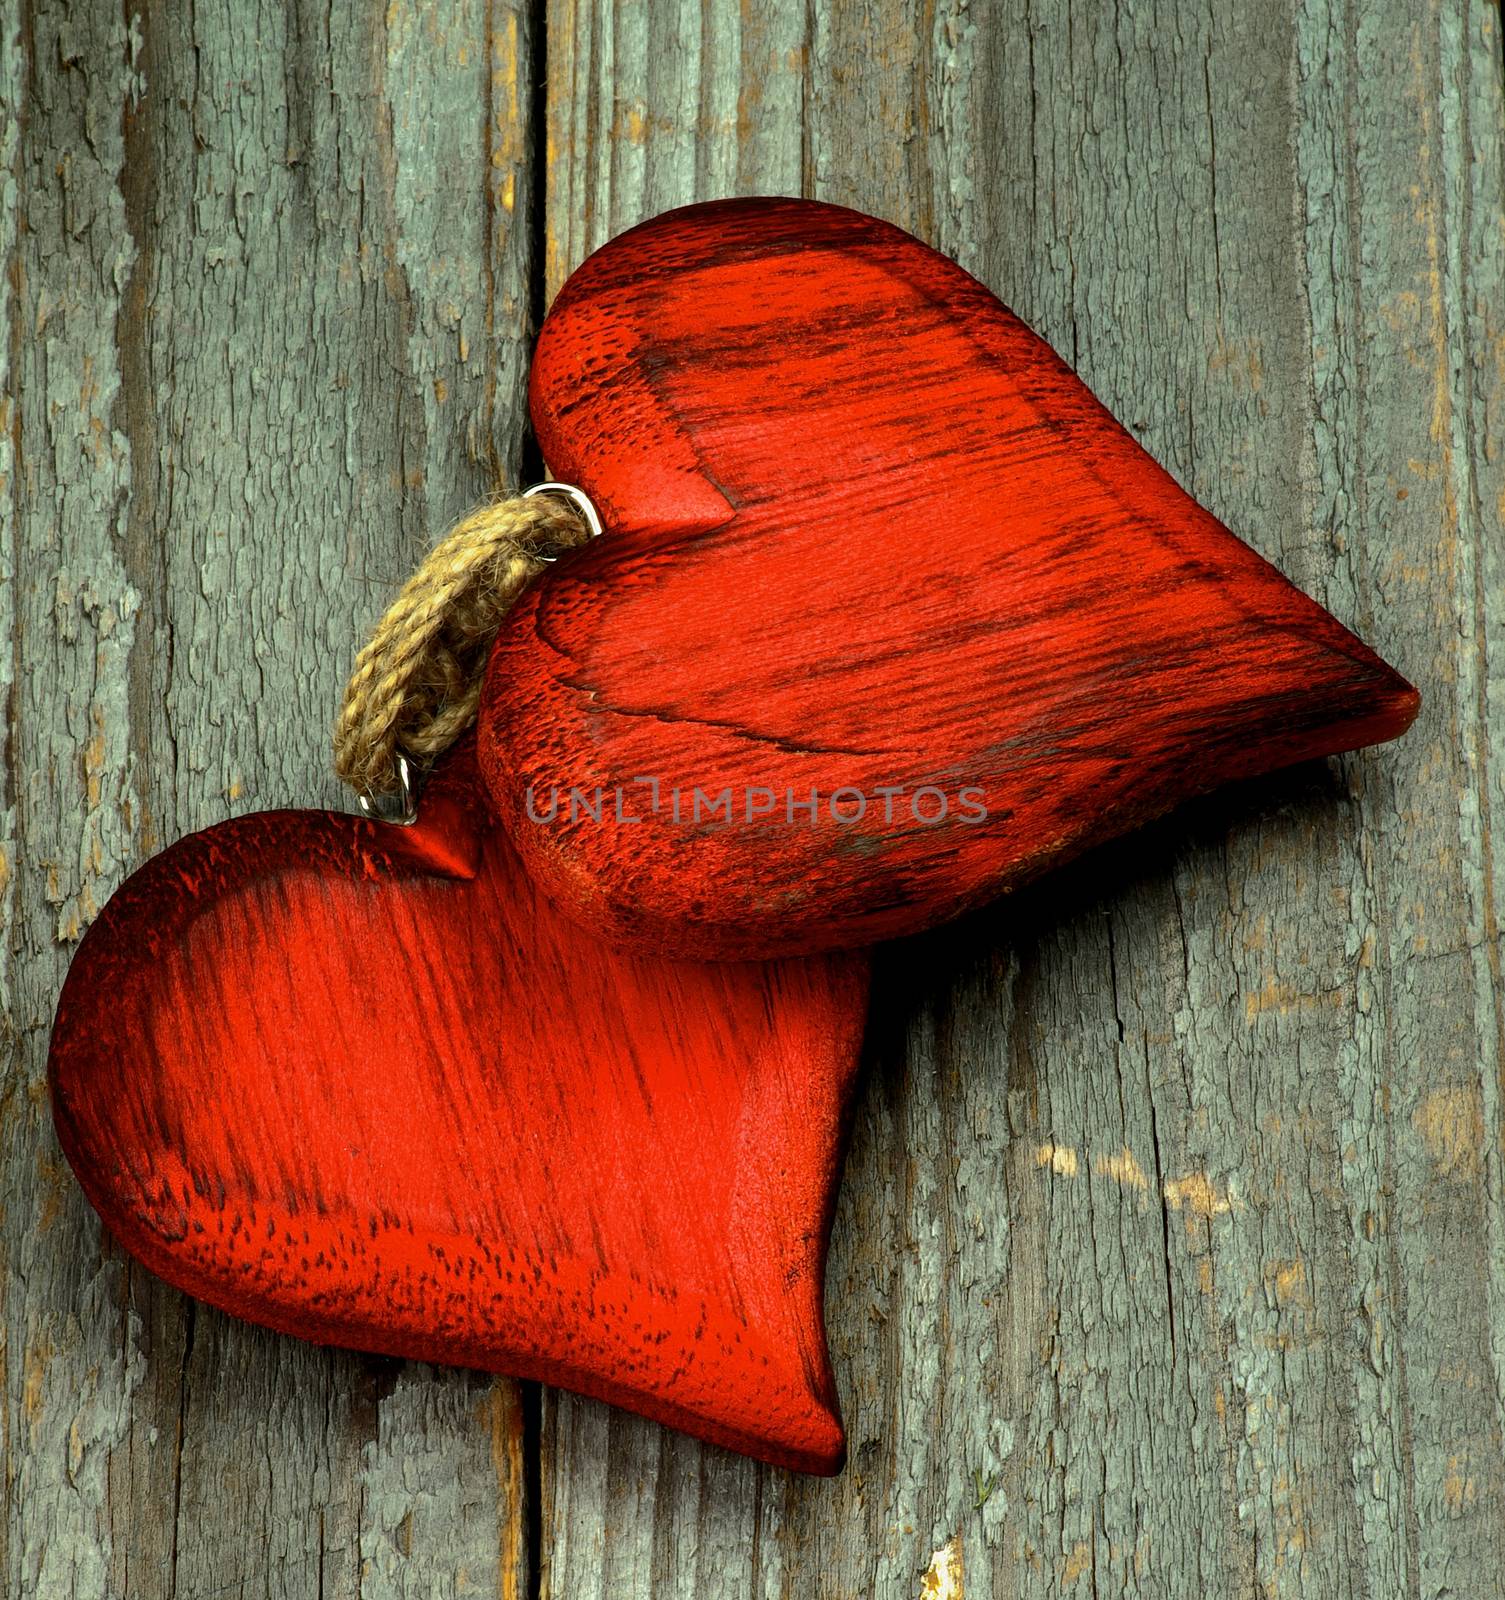 Valentine Theme Background with Two Handmade Wooden Red Hearts closeup on Rustic Wooden background